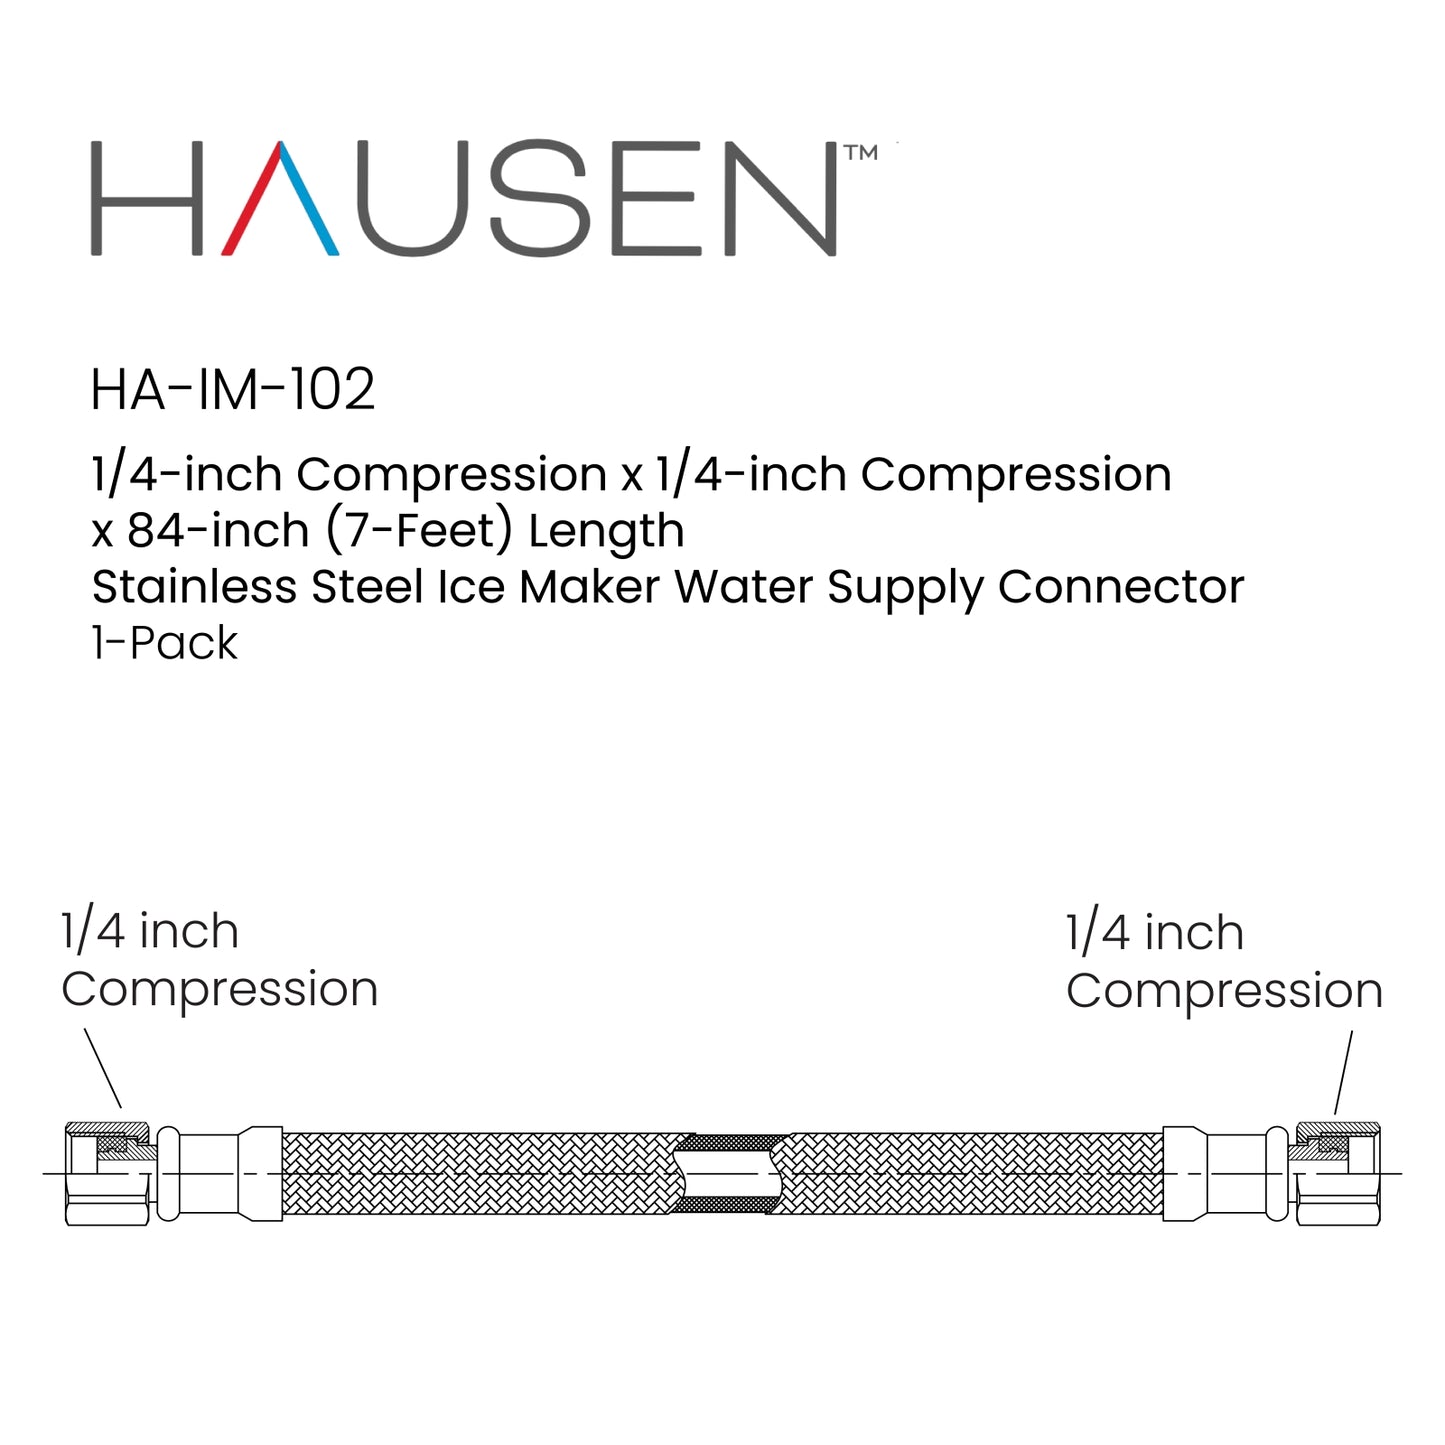 Hausen 1/4-inch Compression x 1/4-inch Compression x 84-inch (7-Feet) Length Stainless Steel Ice Maker Water Supply Connector; Compatible with Standard Refrigerators, 1-Pack